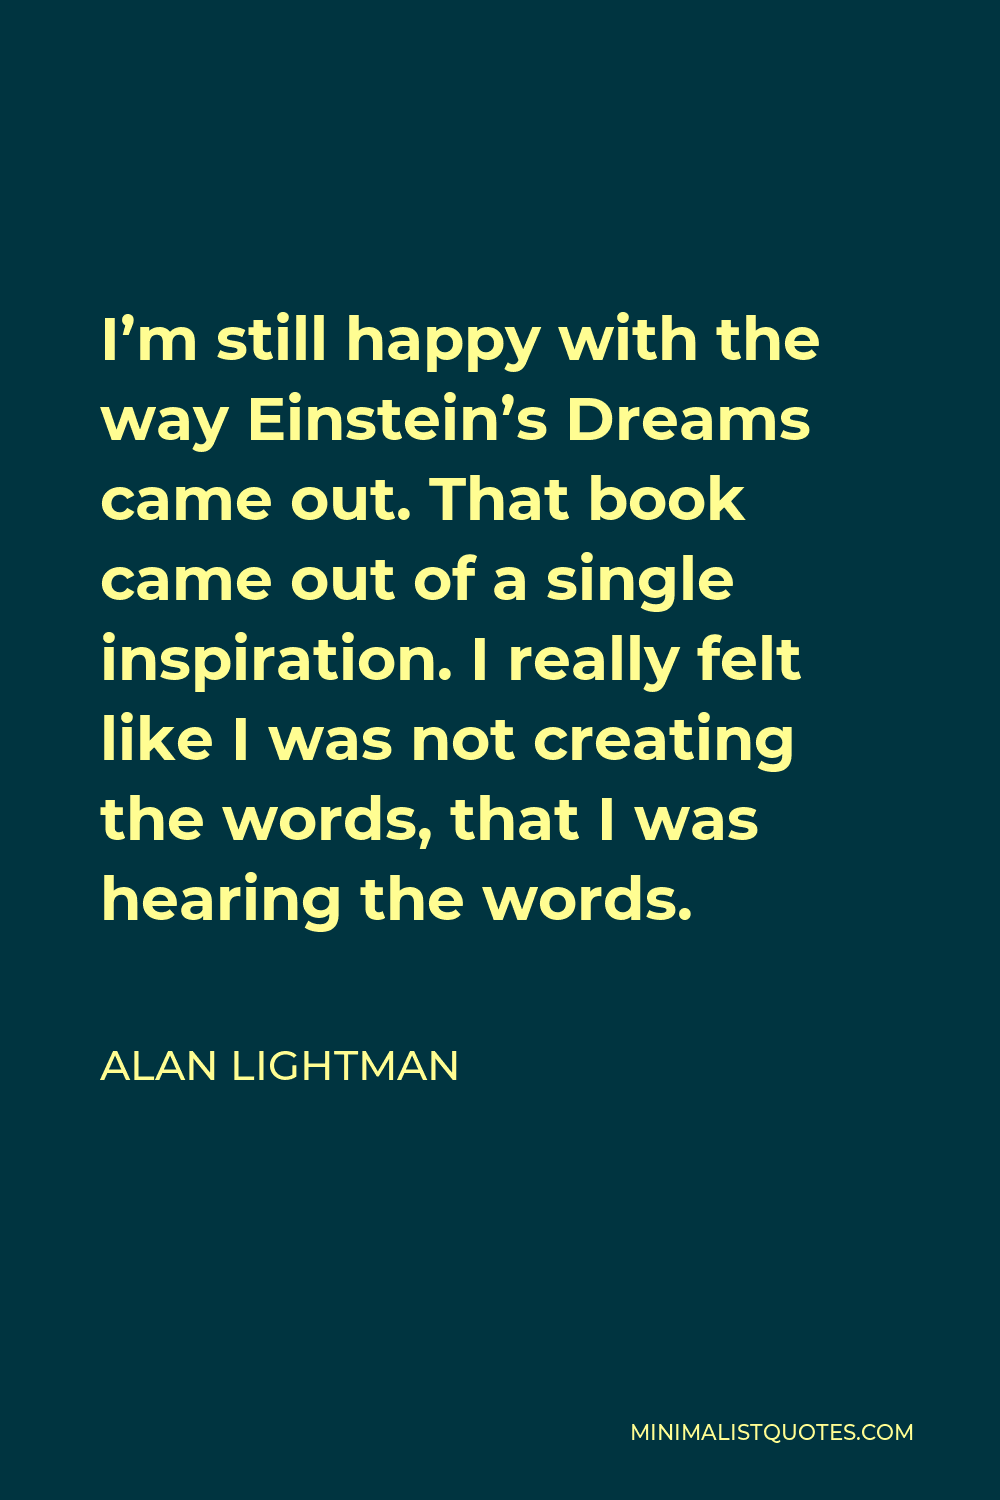 Alan Lightman Quote - I’m still happy with the way Einstein’s Dreams came out. That book came out of a single inspiration. I really felt like I was not creating the words, that I was hearing the words.